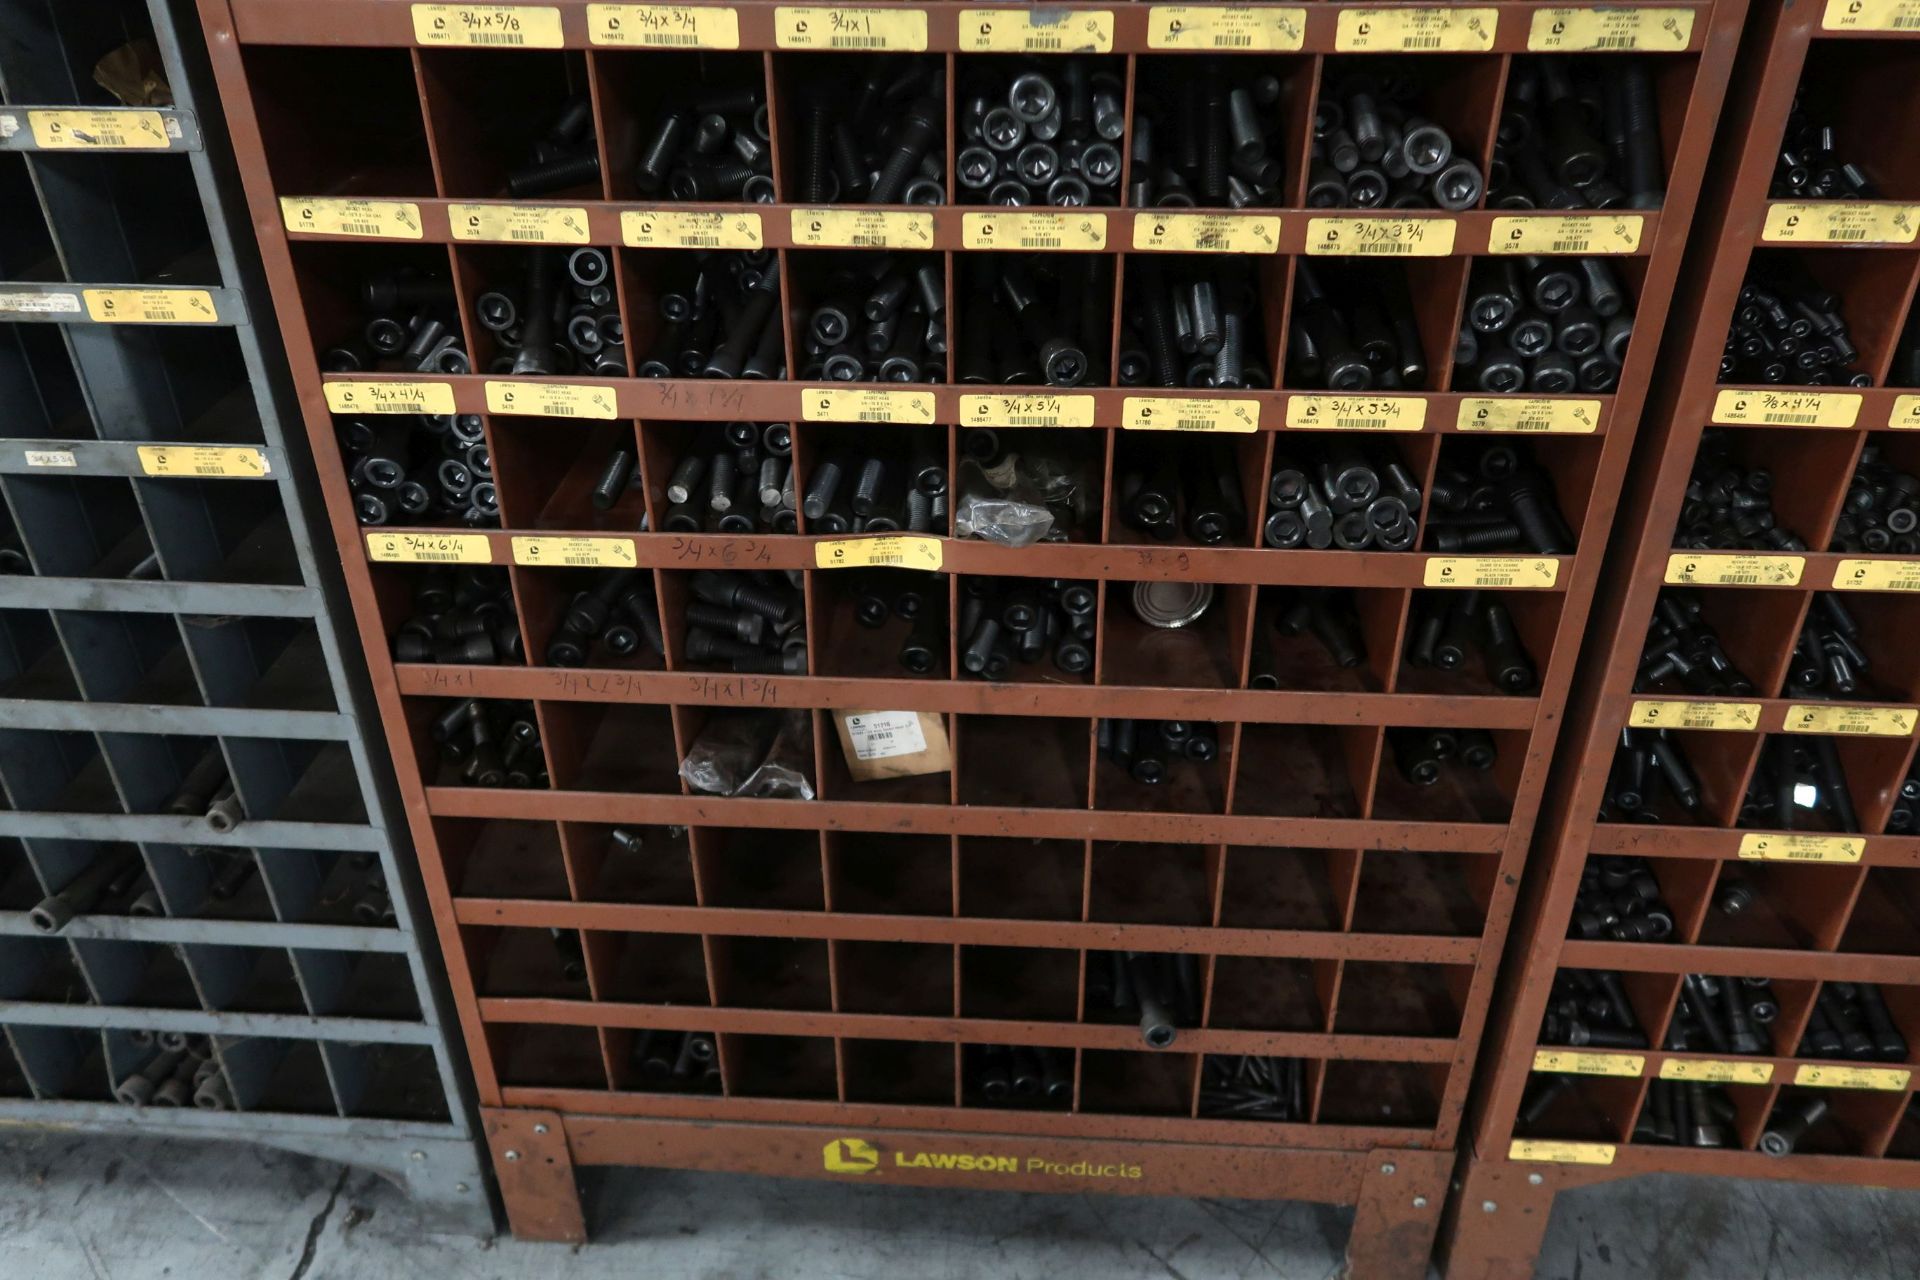 40 BIN AND 72 BIN PIDGEON HOLE HARDWARE CABINET WITH CONTENTS **LOADING PRICE DUE TO ERRA - $25. - Image 3 of 3